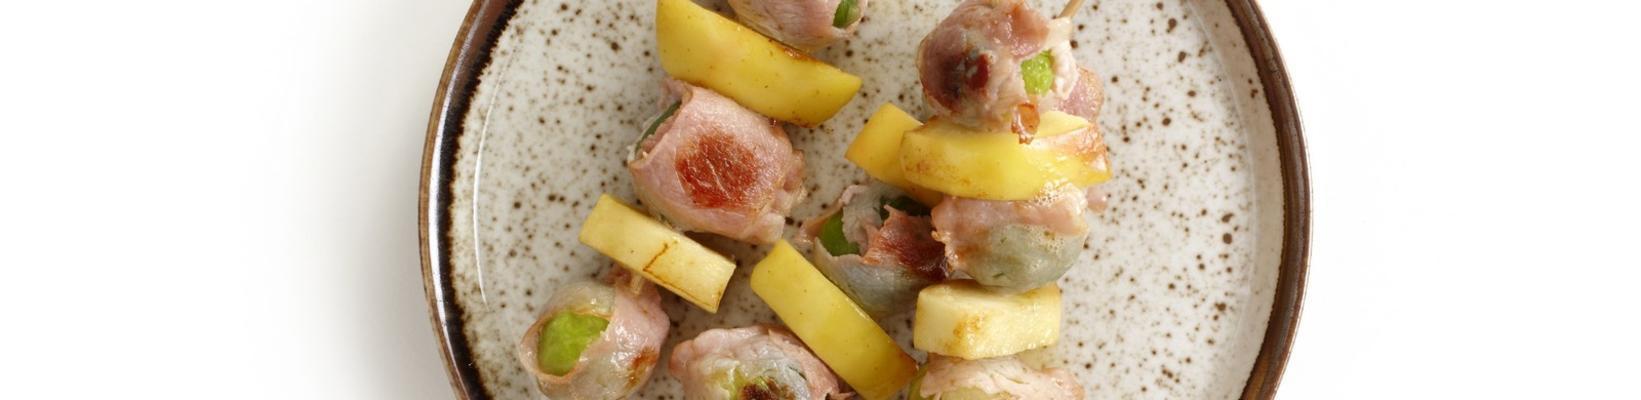 sprouts skewers with apple and bacon